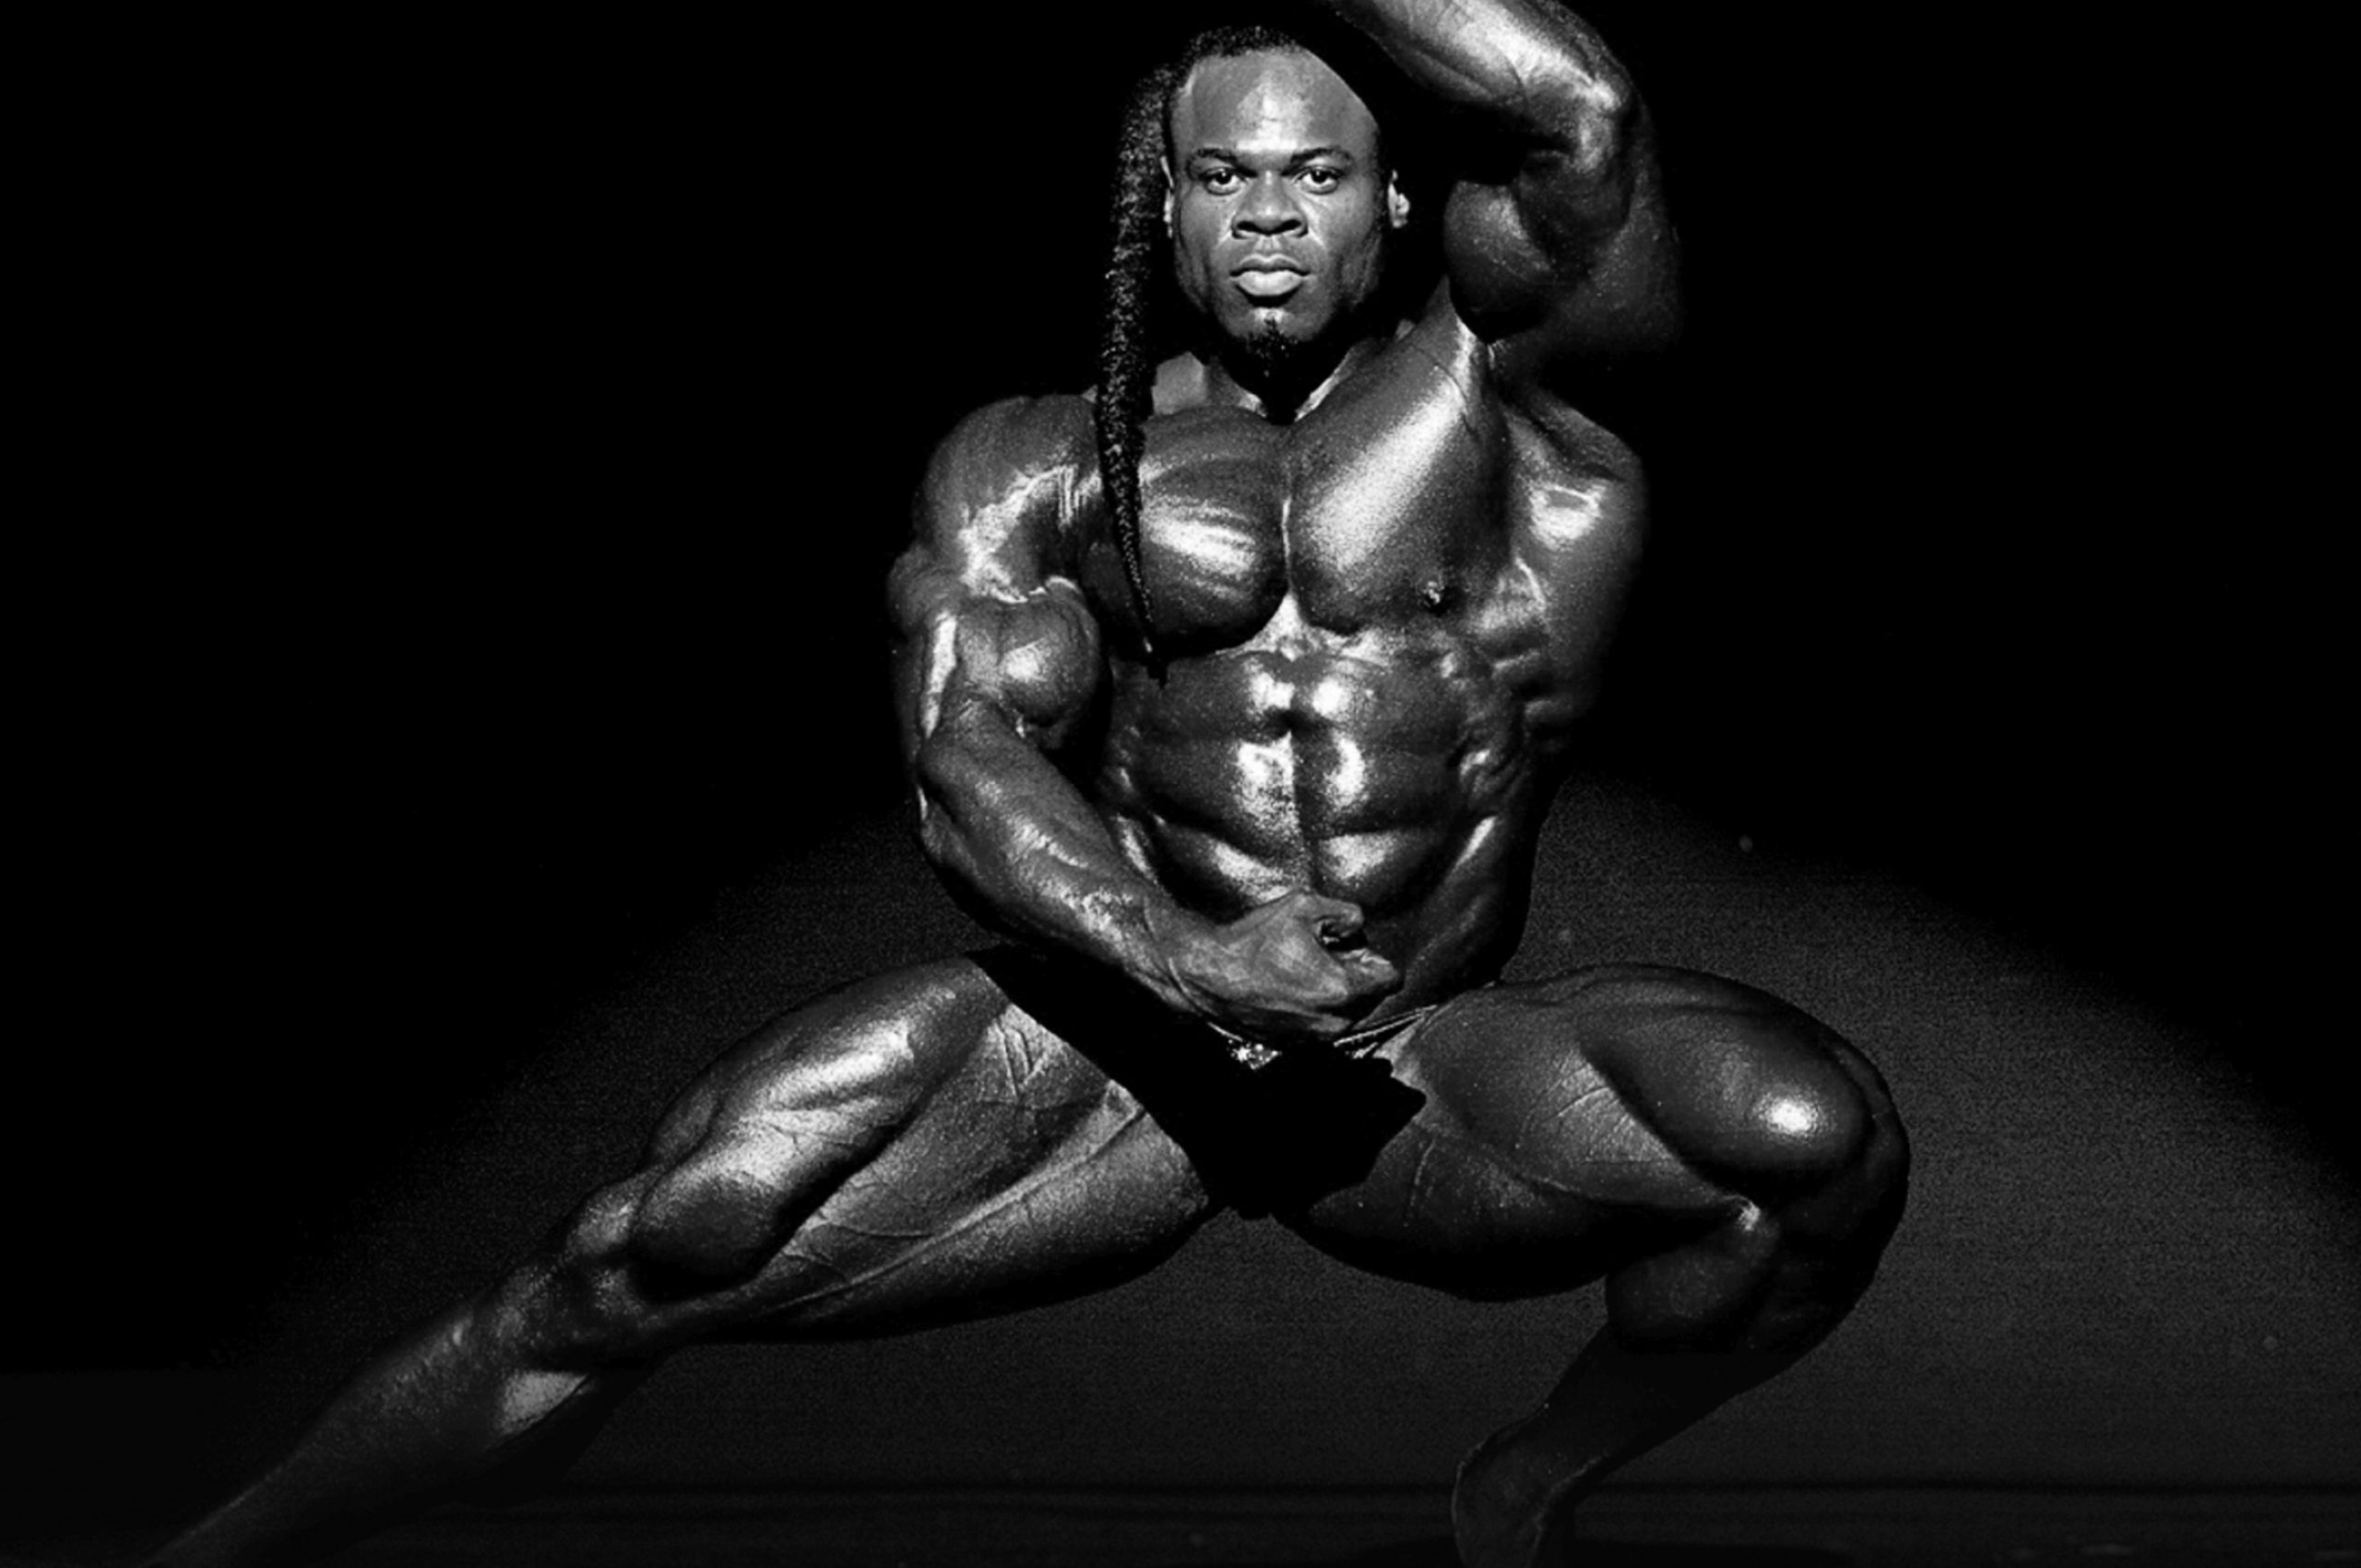 Bodybuilding: Kai Greene, Physical attractiveness, Posing routine, Competitive sport. 2560x1700 HD Background.